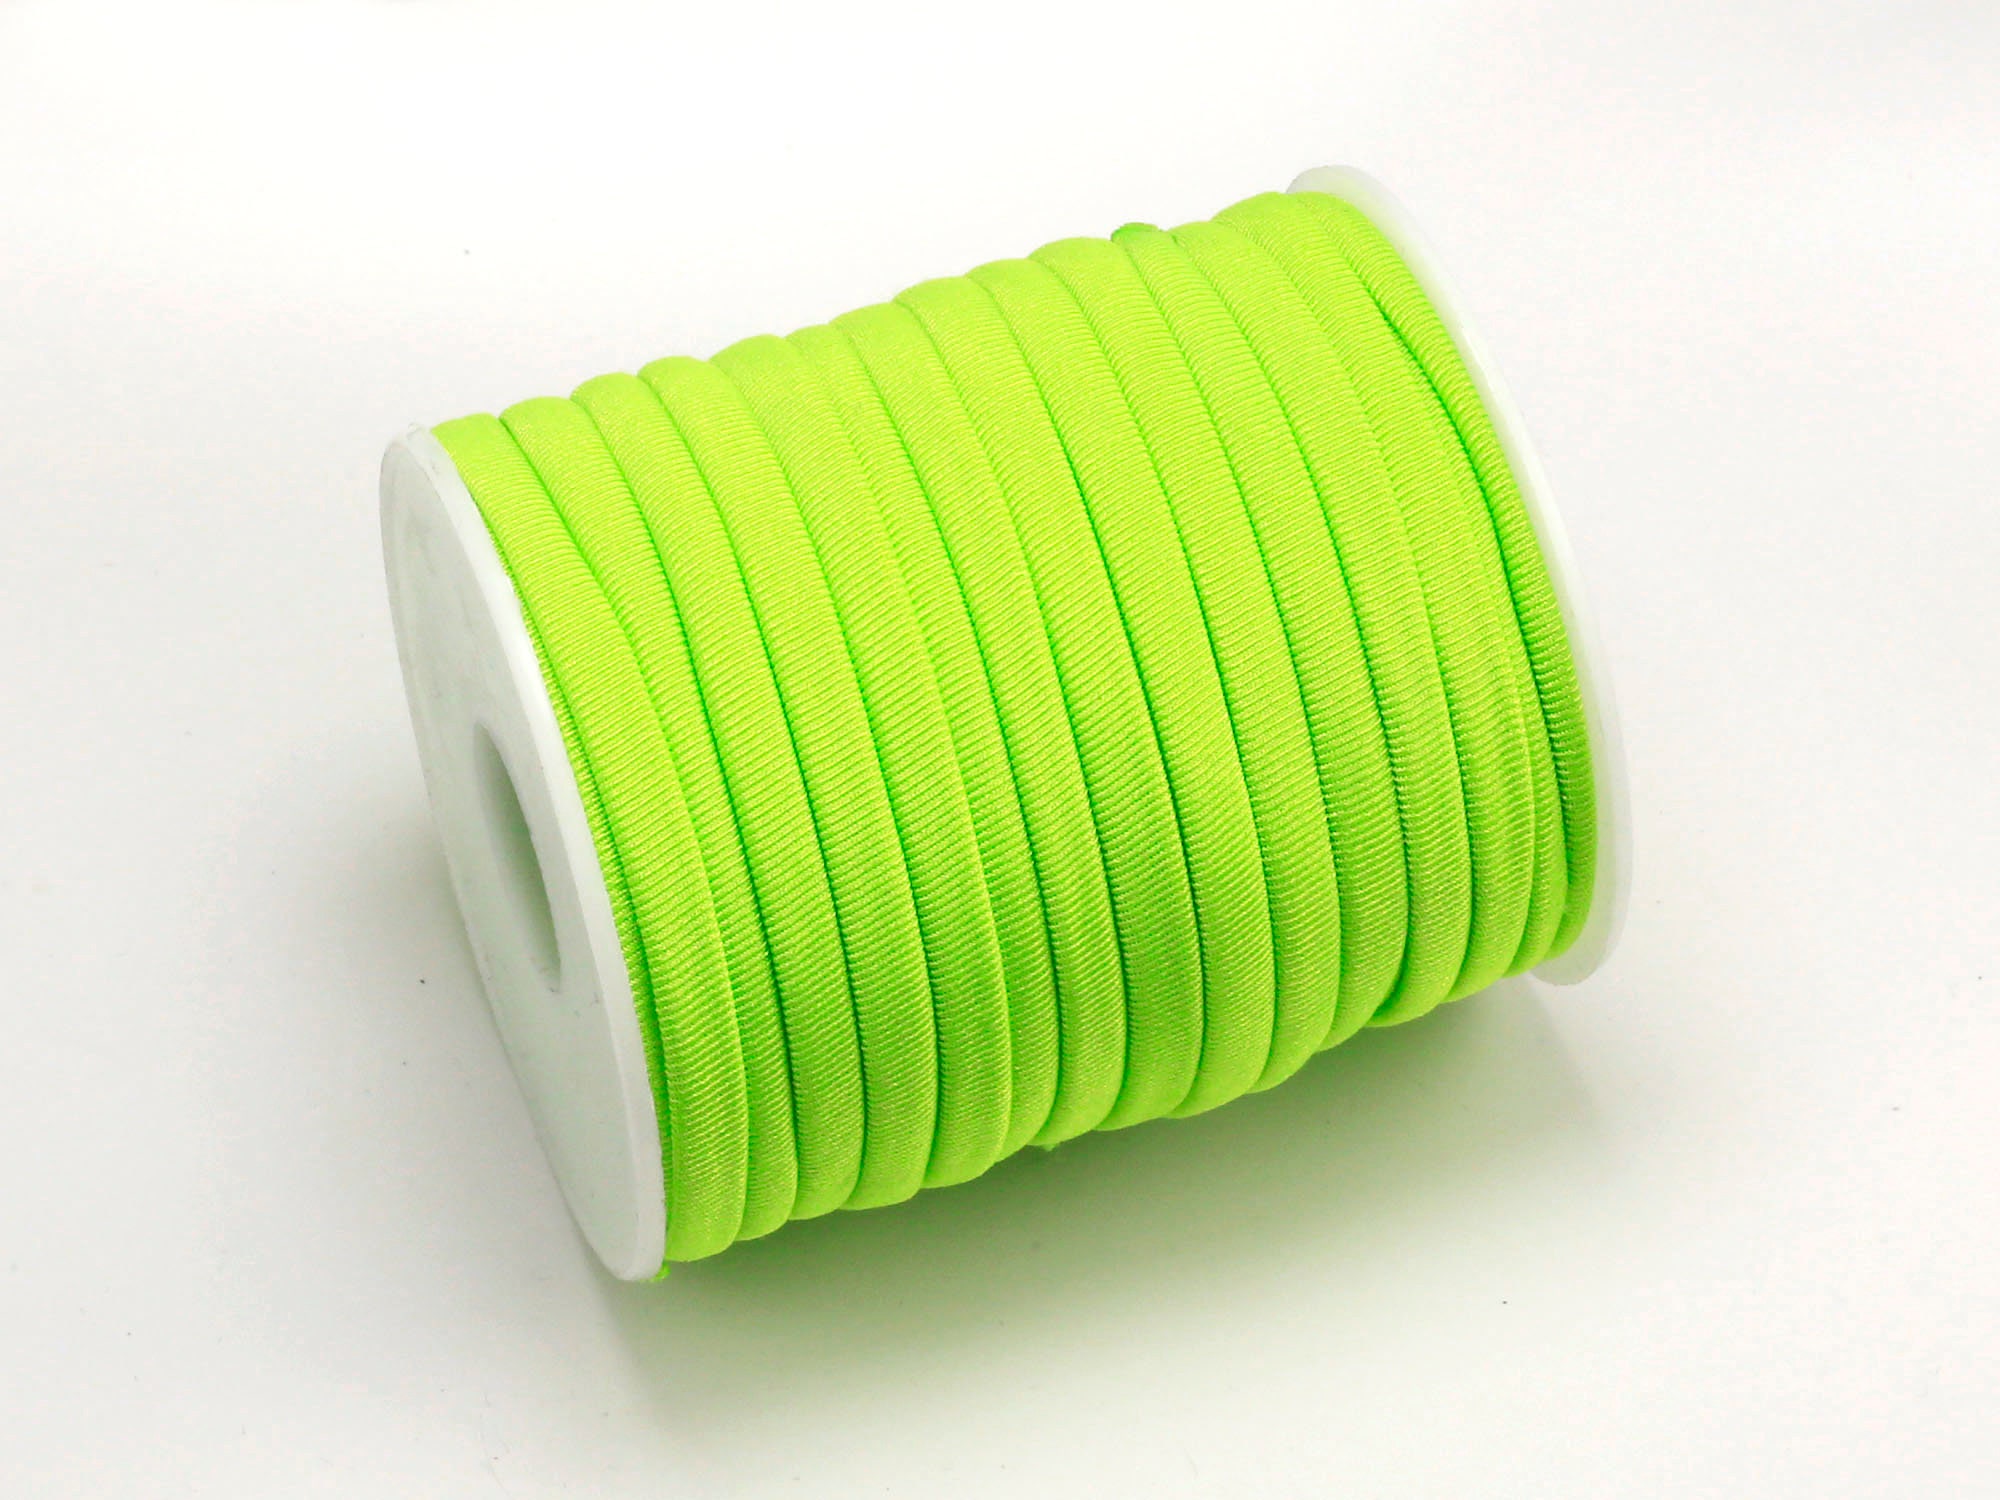 Buy Lycra Cord, Soft Elastic Cord, 5mm, Metallic / Neon Colors, Spandex  Nylon Cords, Stitched Fabric Strips, Swimsuit Straps, Jewelry Making Online  in India 